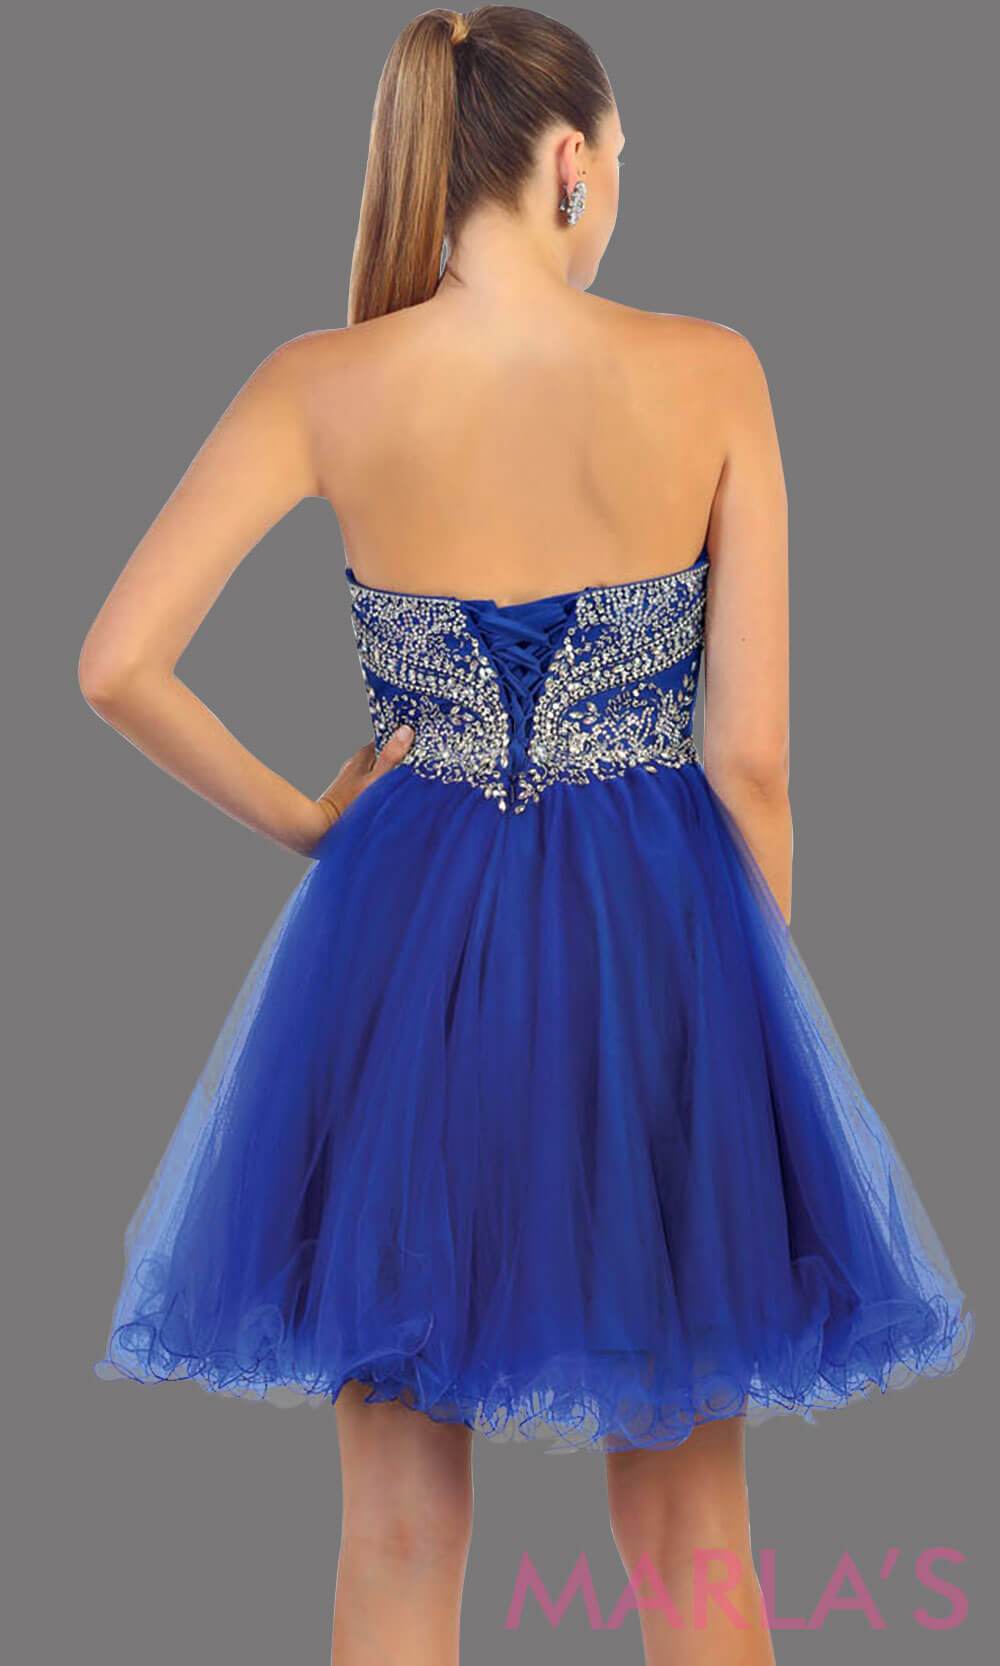 Back of short strapless puffy royal blue dress. This short blue grade 8 graduation dress has sequin bodice and corset back. This is perfect for homecoming, semi formal, bridal shower. Available in plus sizes